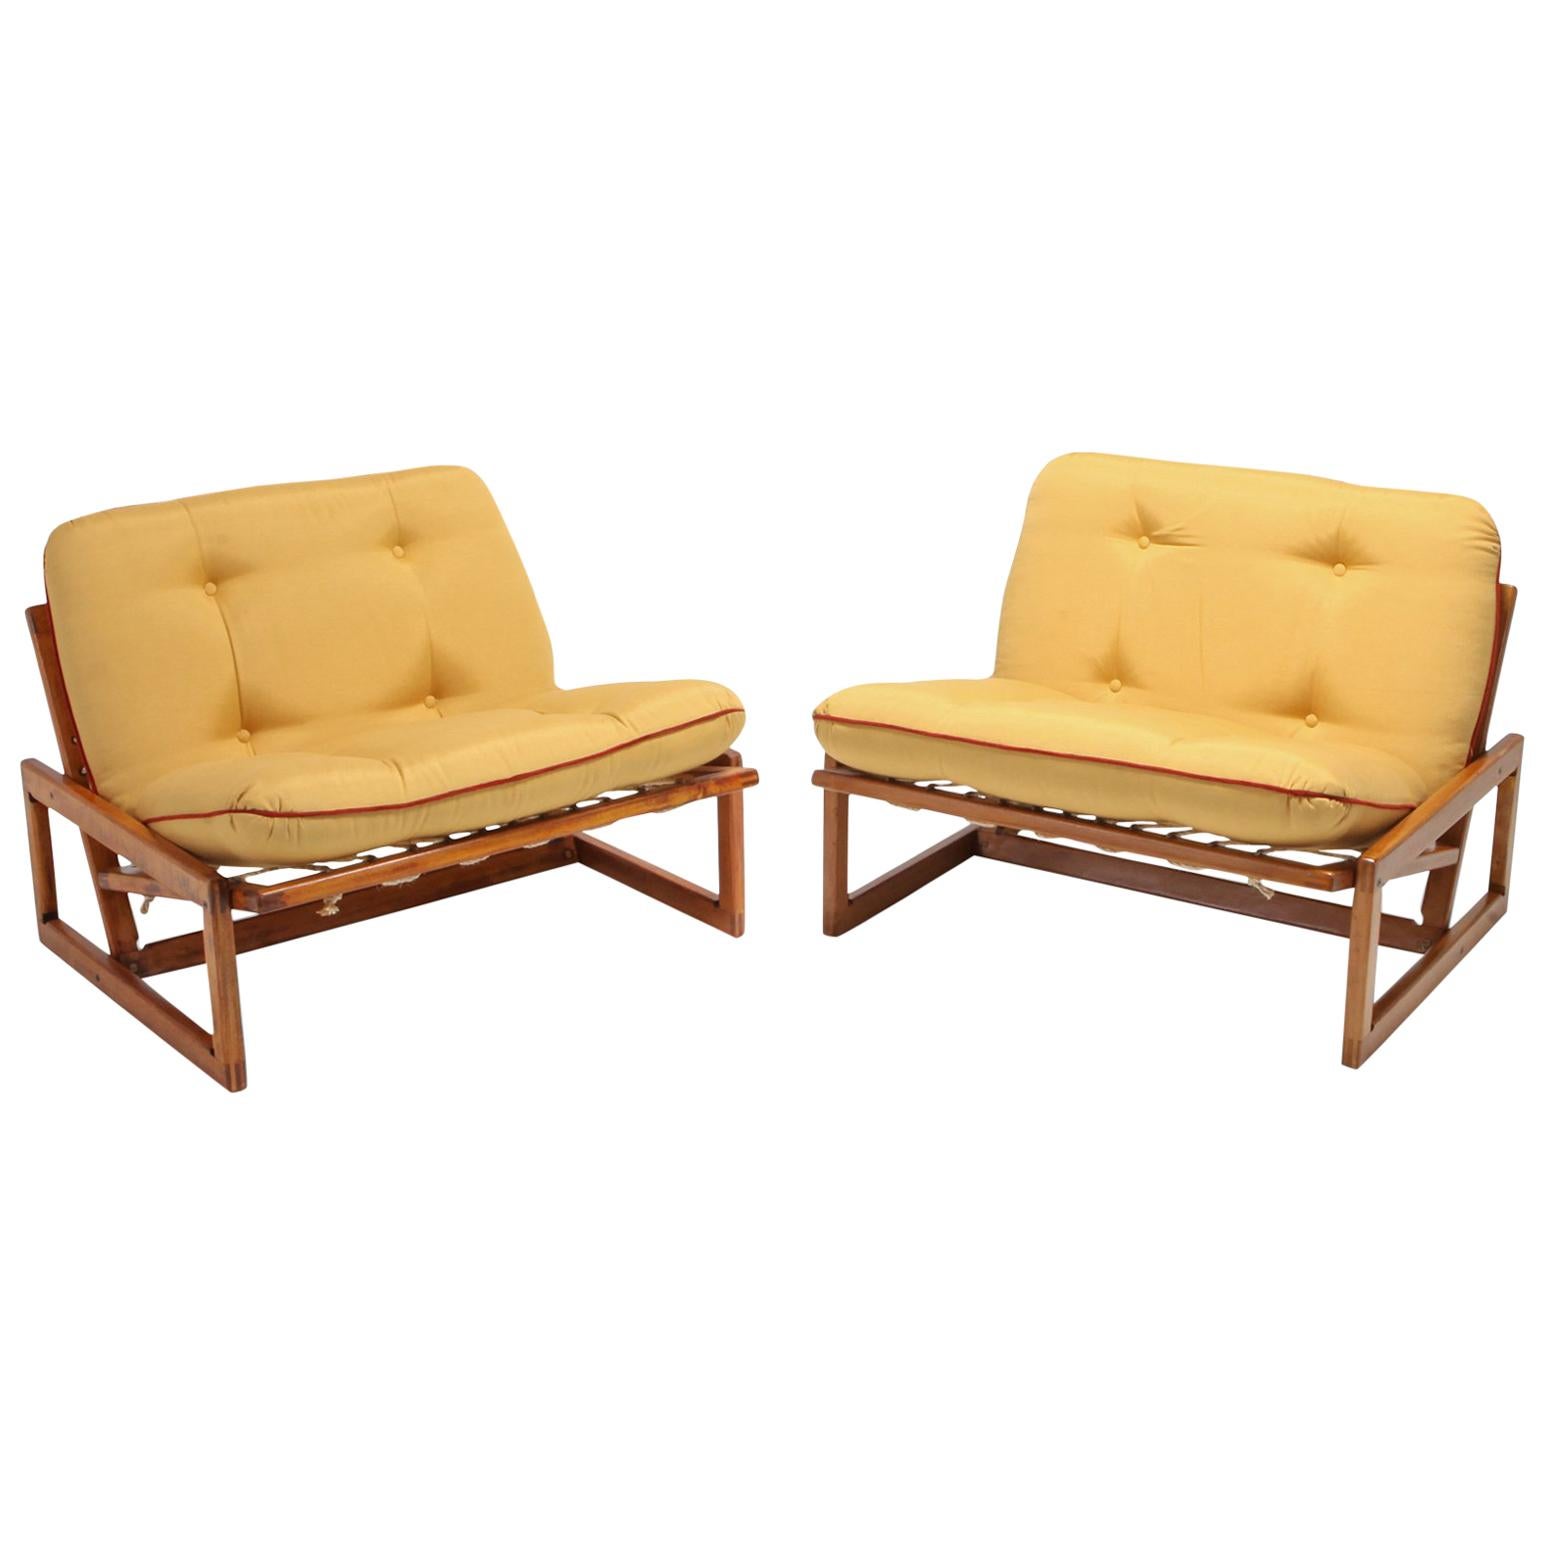 Carlotta lounge chairs by Afra & Tobia Scarpa for Cassina.
Cassina manufactured these in the 1960s.
So it's a very early and rare Mid-Century Modern piece.
As you can see on the markings of the chairs which dates these before 1964.




 